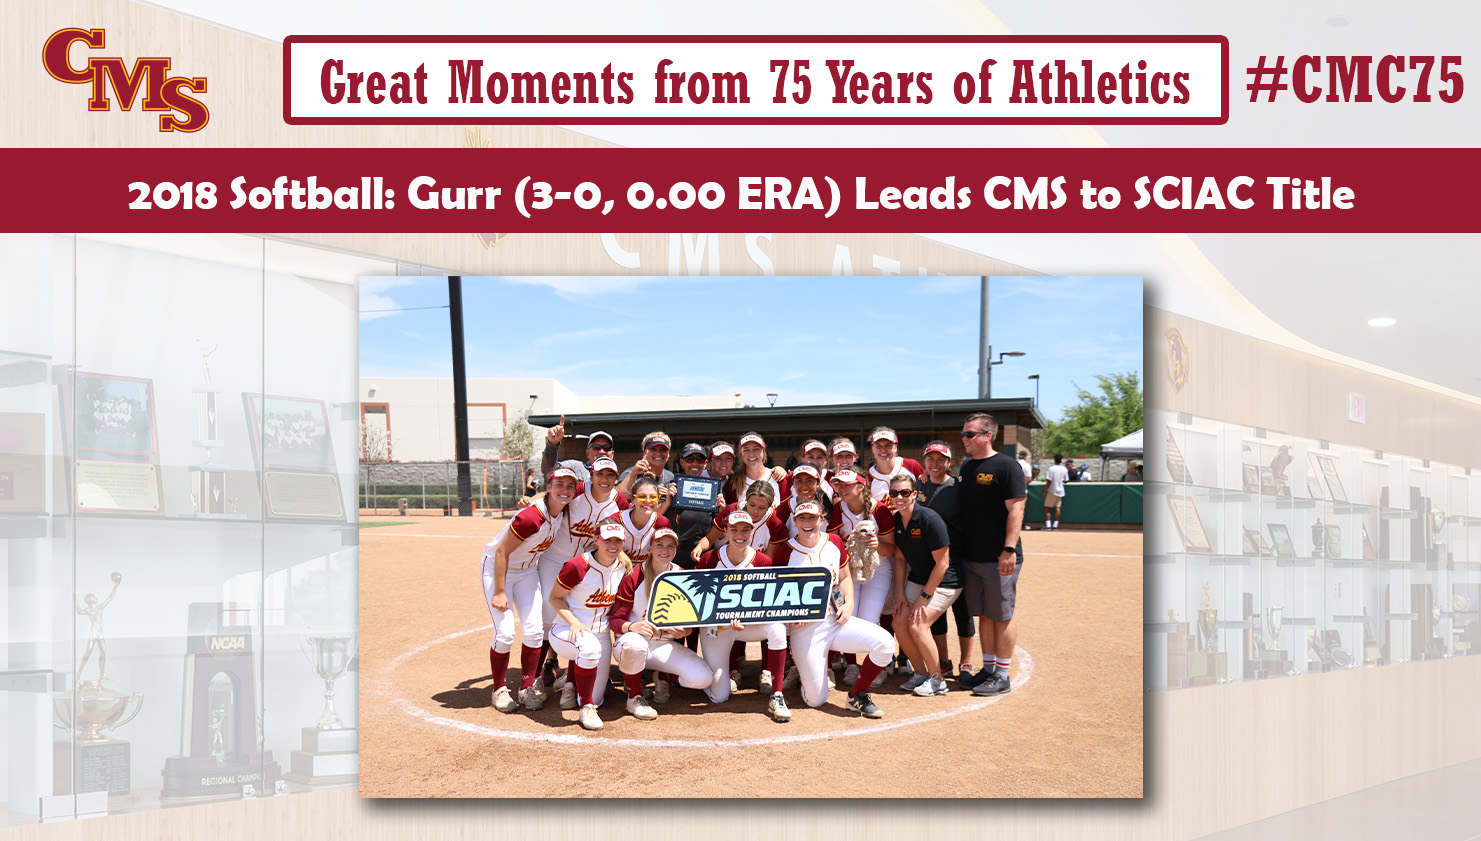 The Athenas celebrating with the SCIAC Championship banner. Words over the photo read: Great Moments from 75 Years of Athletics. 2018 Softball: Gurr (3-0, 0.00 ERA) Leads CMS to SCIAC Title